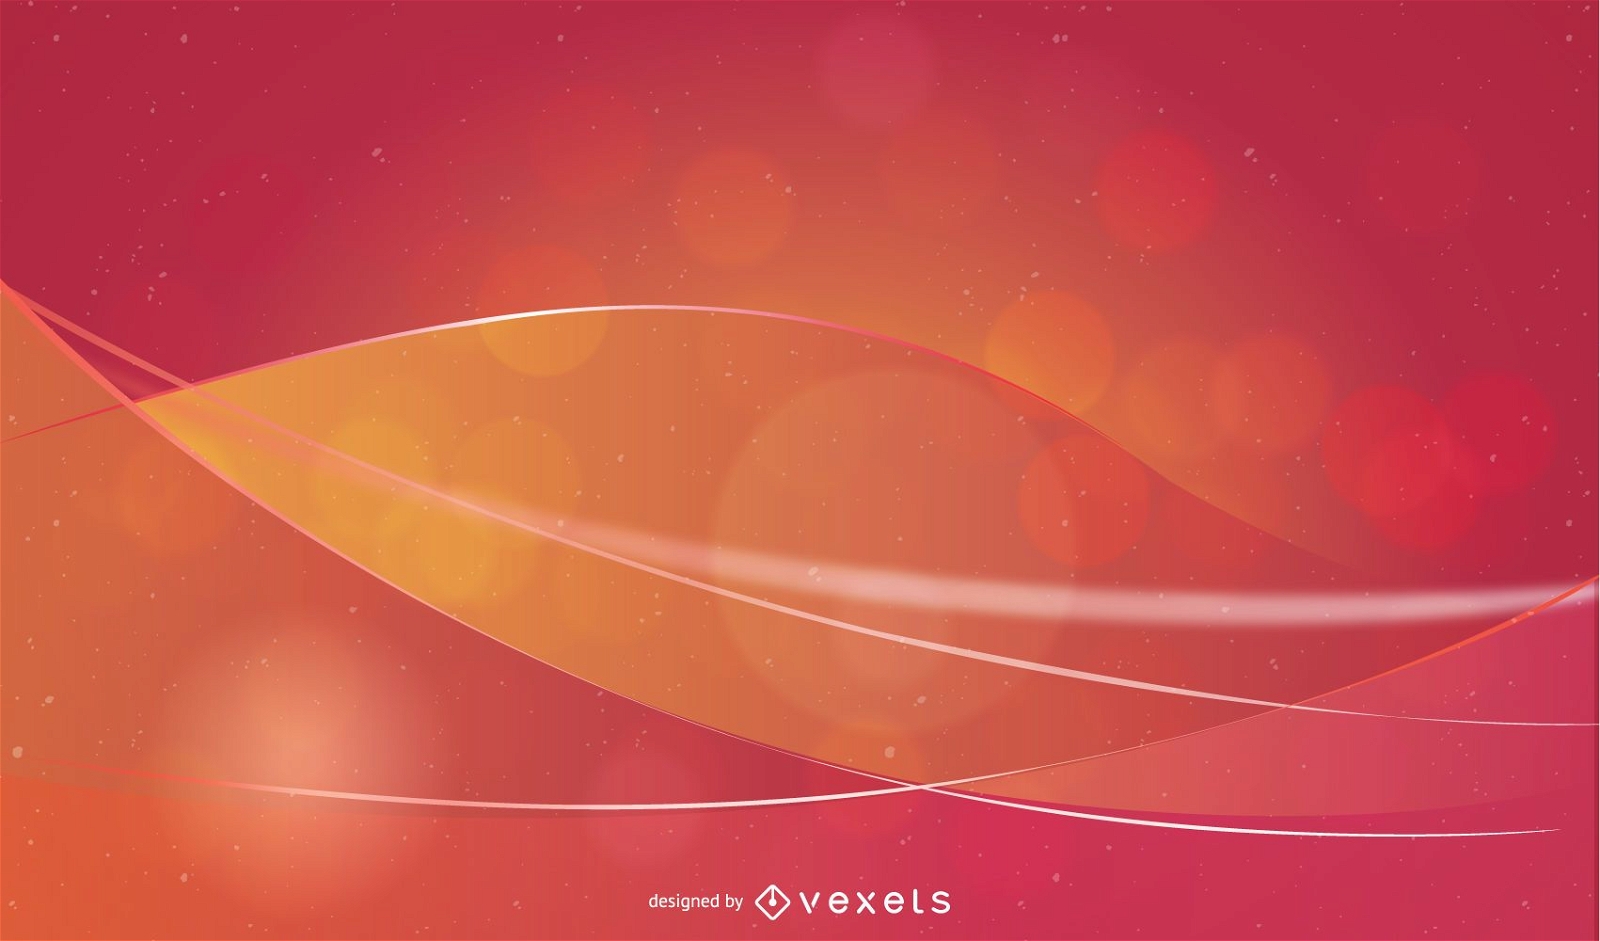 Eps10 Free Vector Background